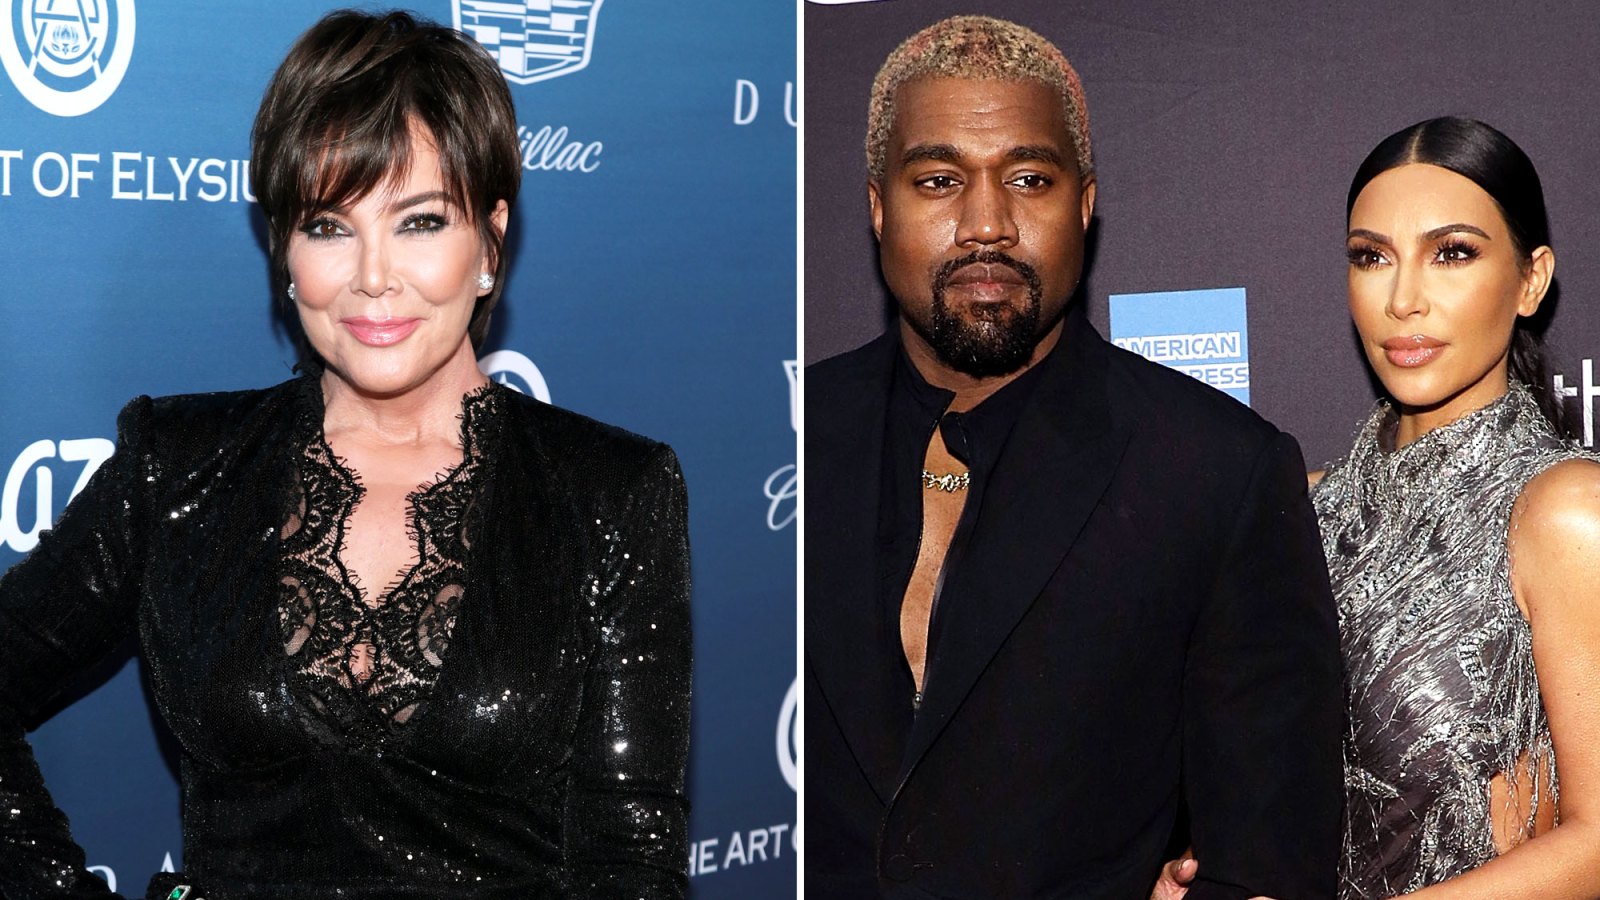 Kris Jenner Has This to Say About Kim Kardashian and Kanye West Having Baby No. 4